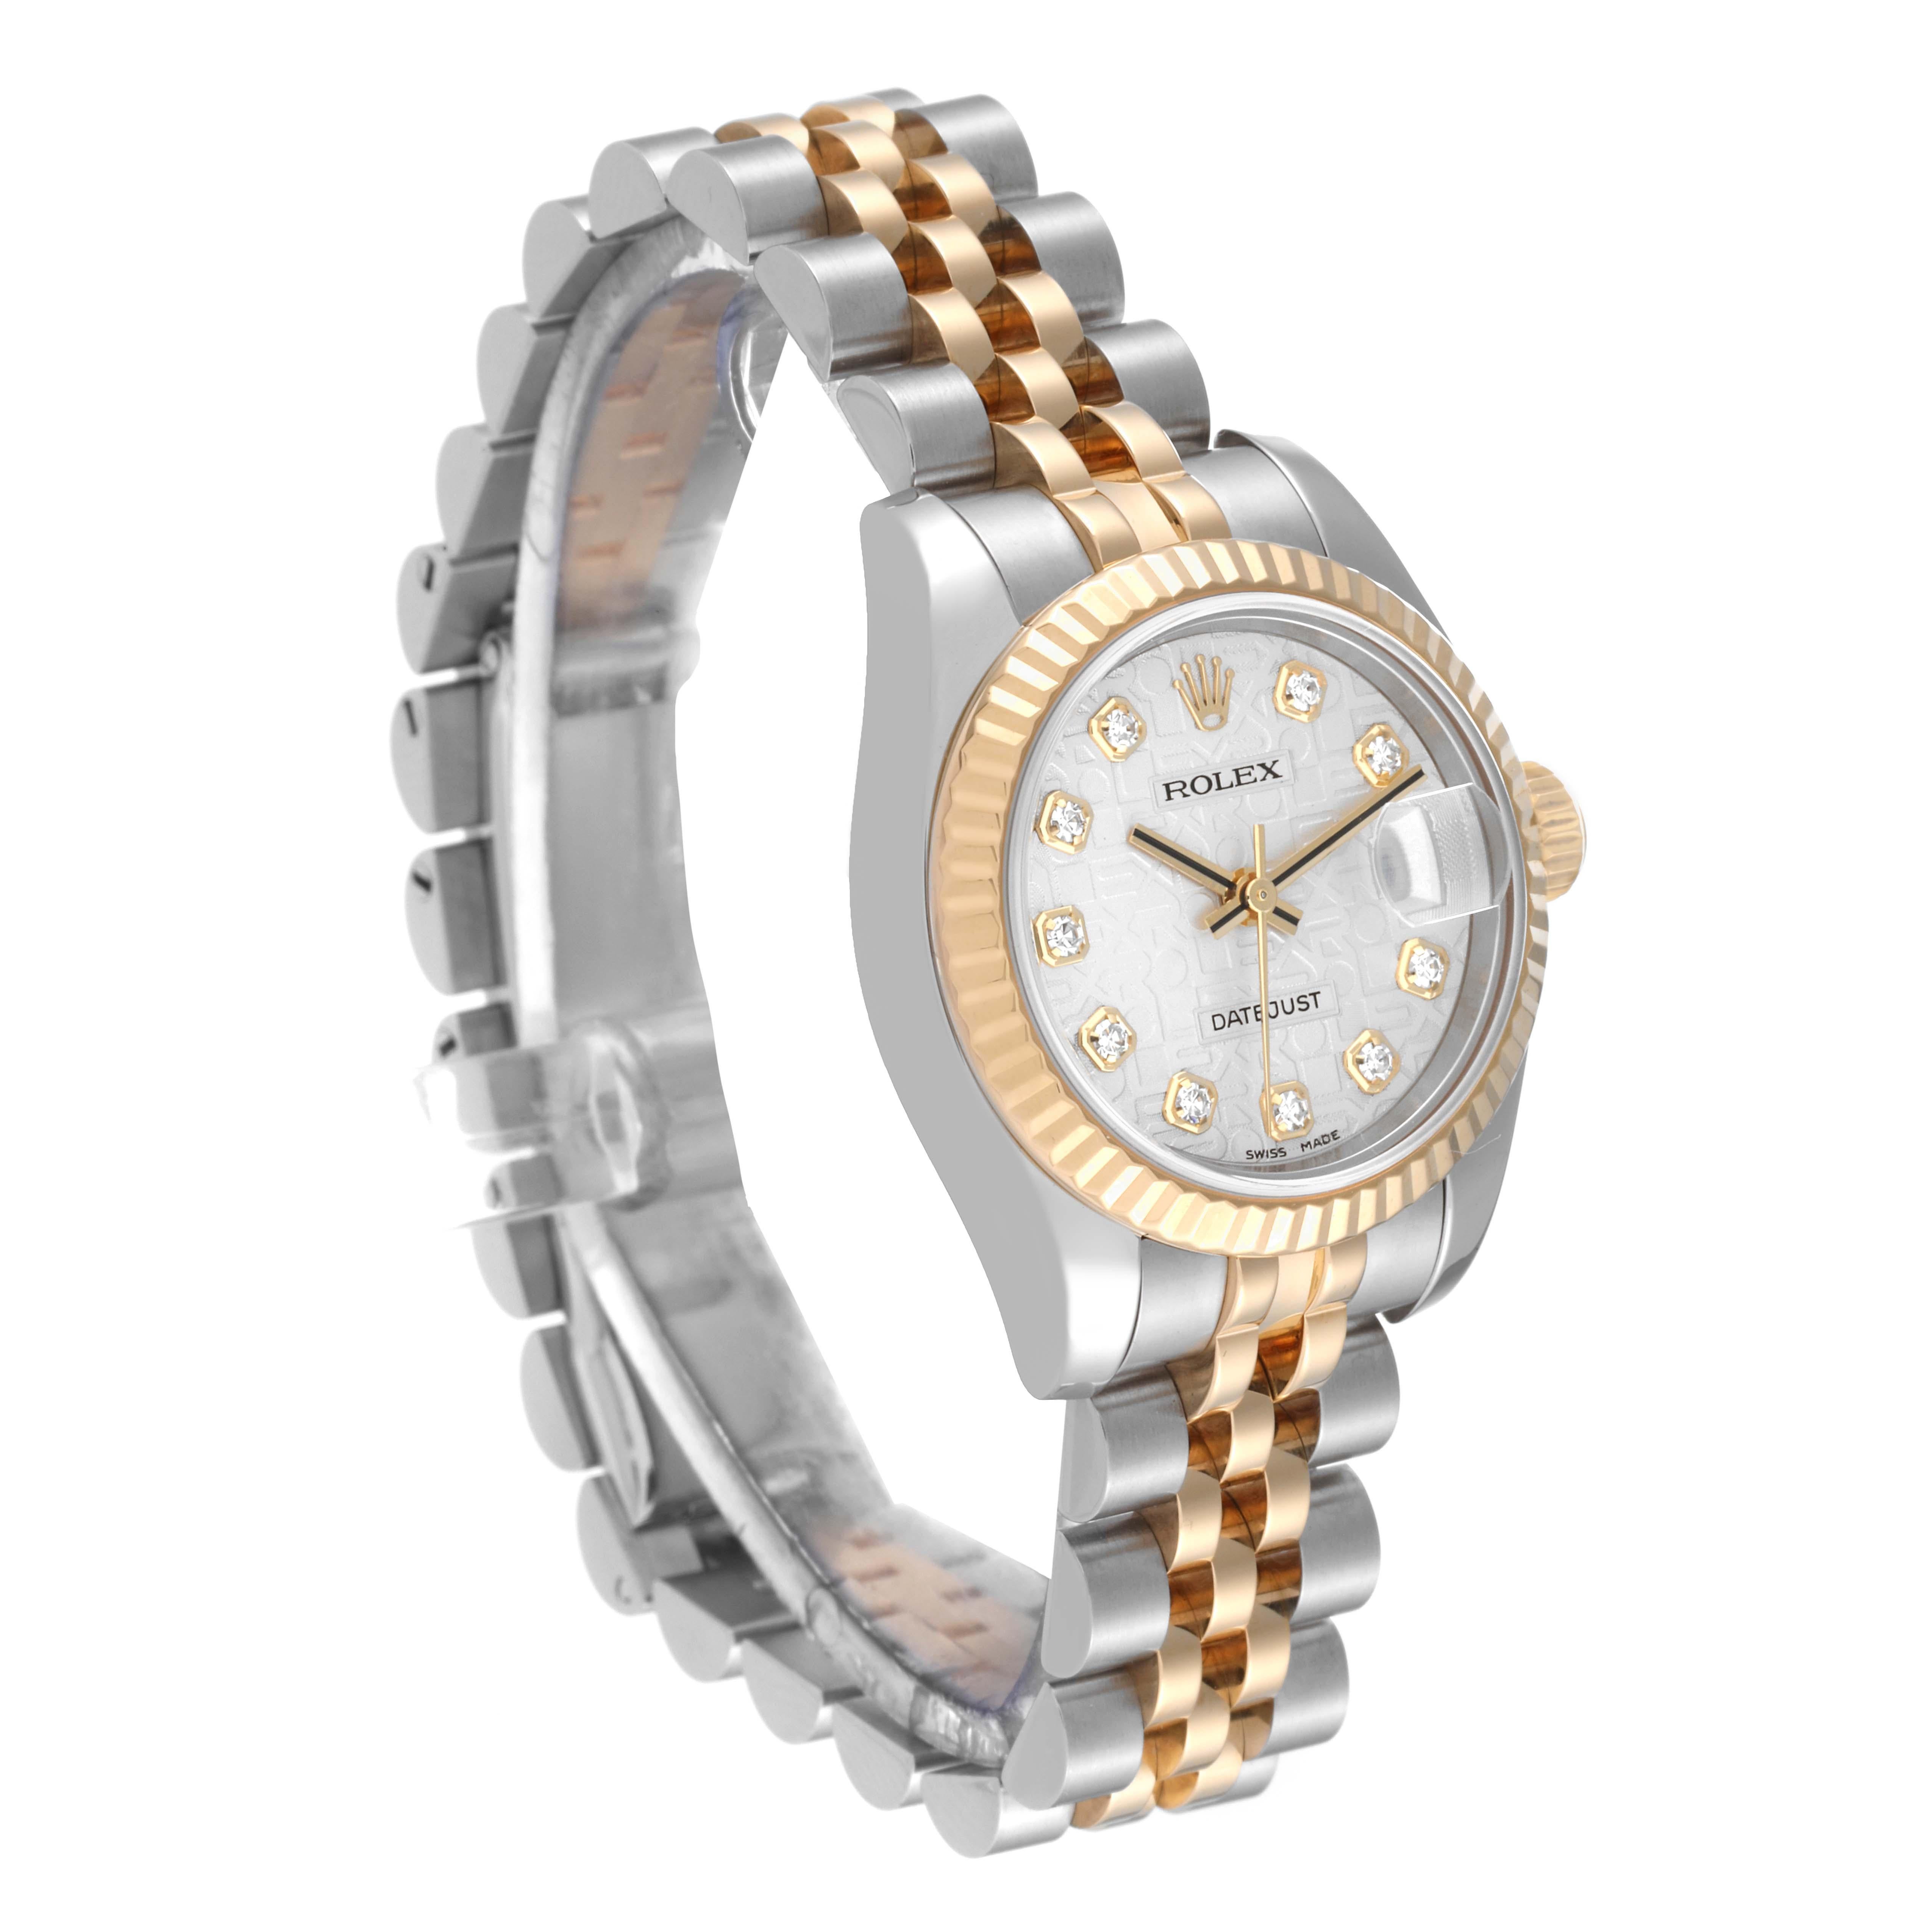 Rolex Datejust Steel Yellow Gold Anniversary Diamond Dial Ladies Watch 179173 In Excellent Condition For Sale In Atlanta, GA